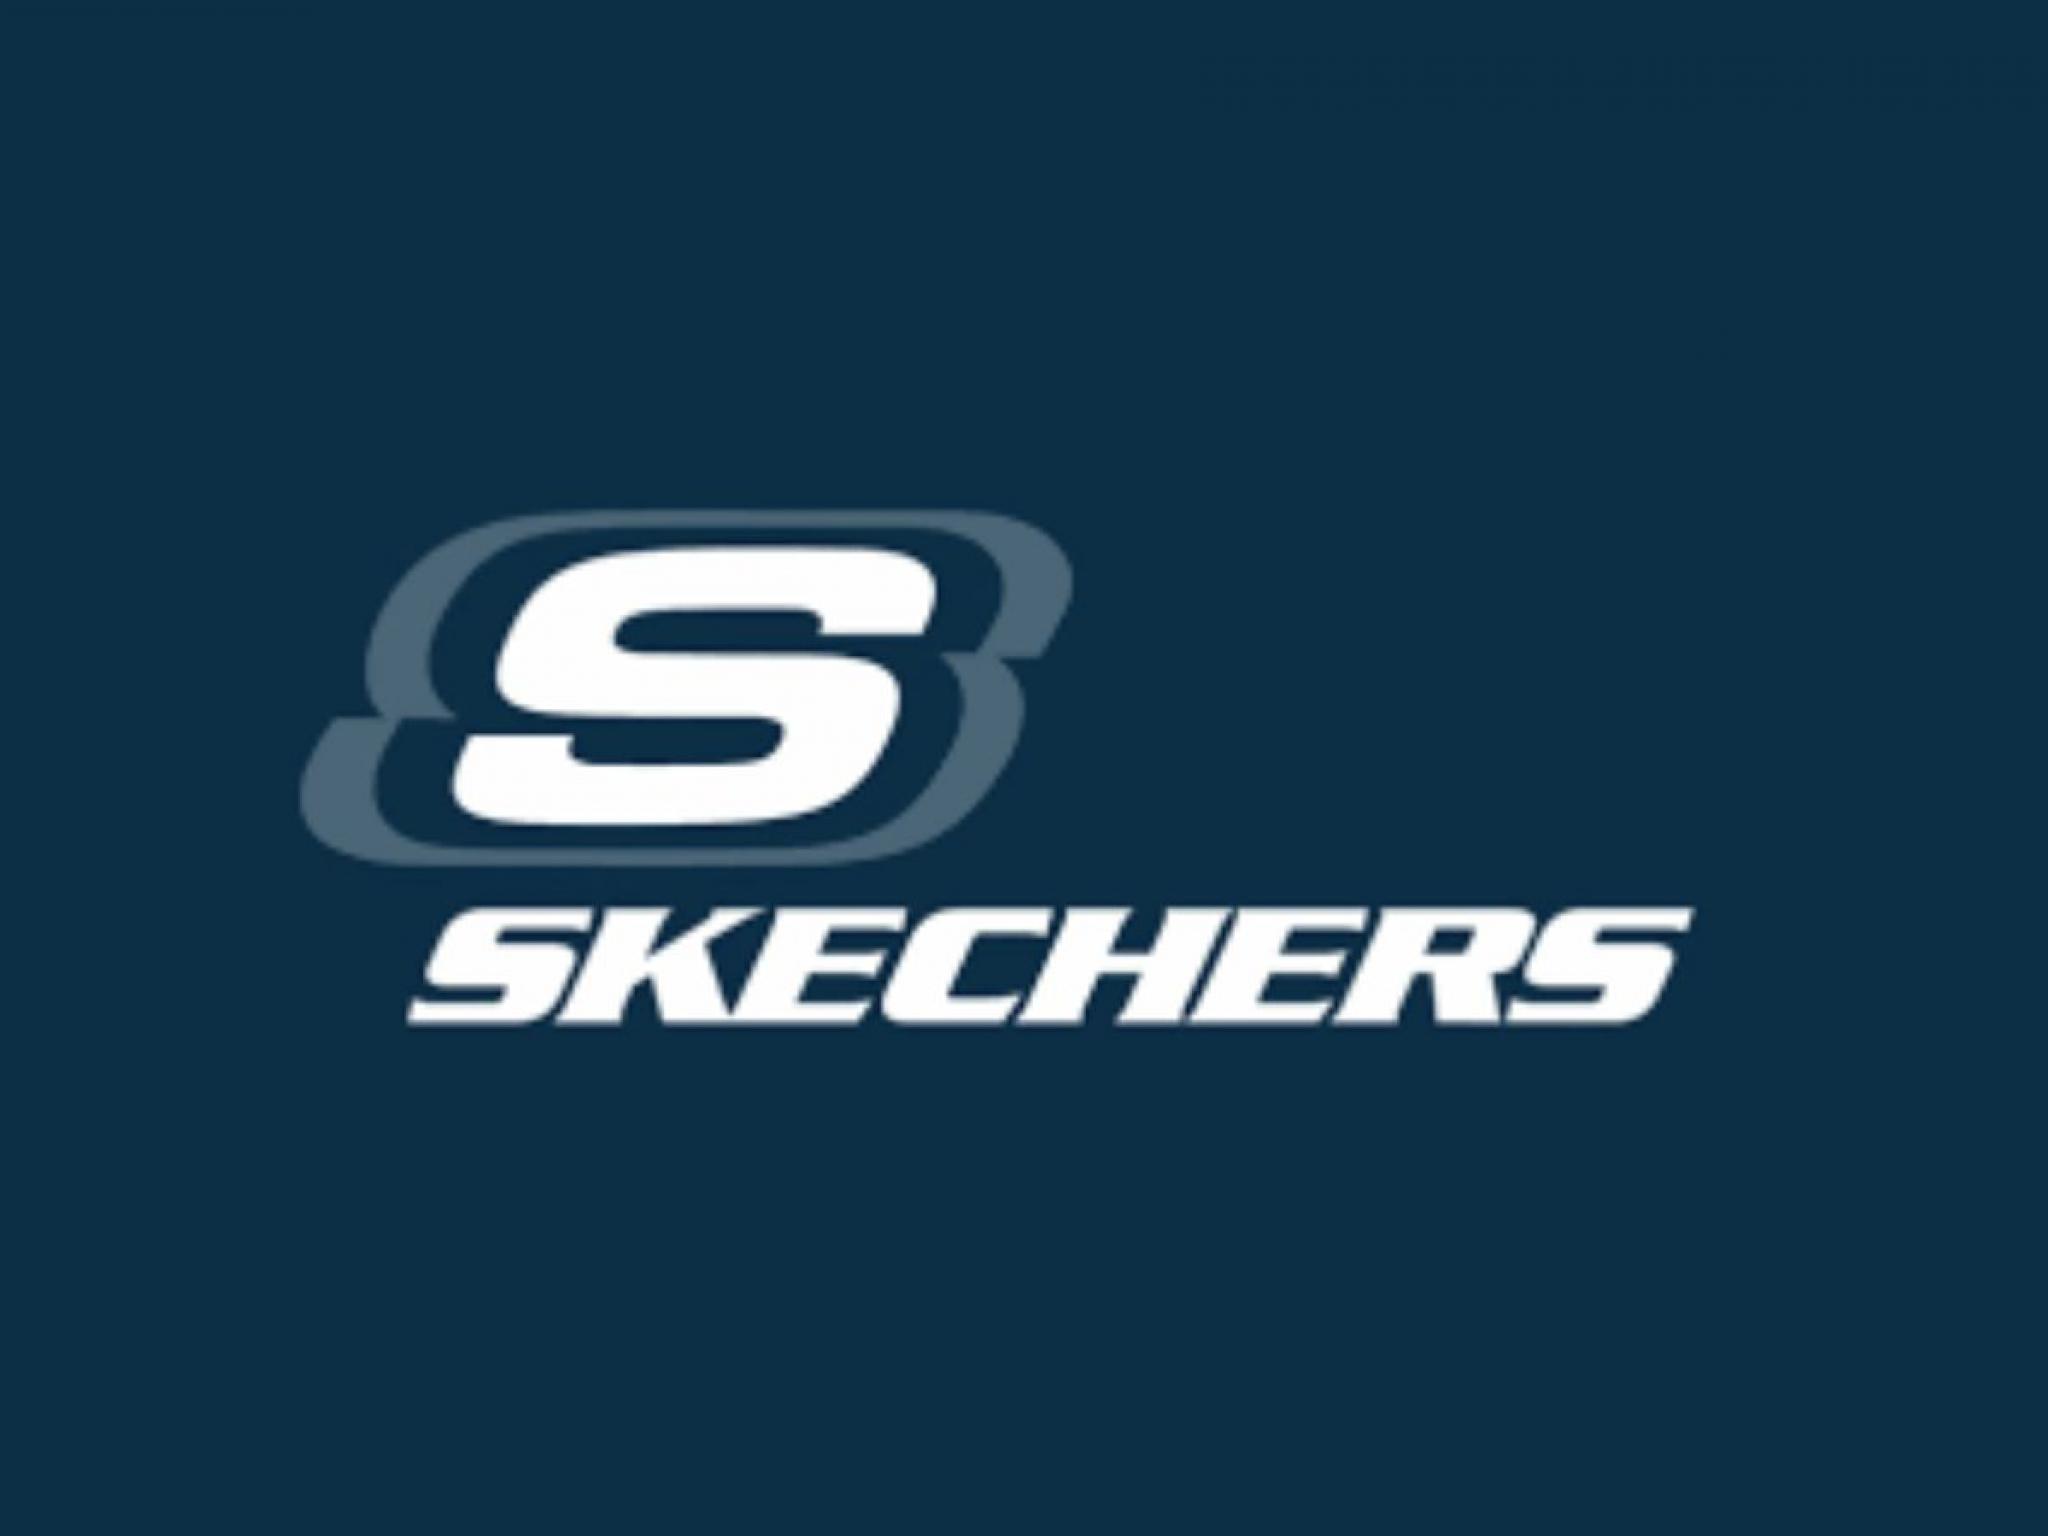  why-skechers-shares-are-trading-lower-by-around-7-here-are-other-stocks-moving-in-fridays-mid-day-session 